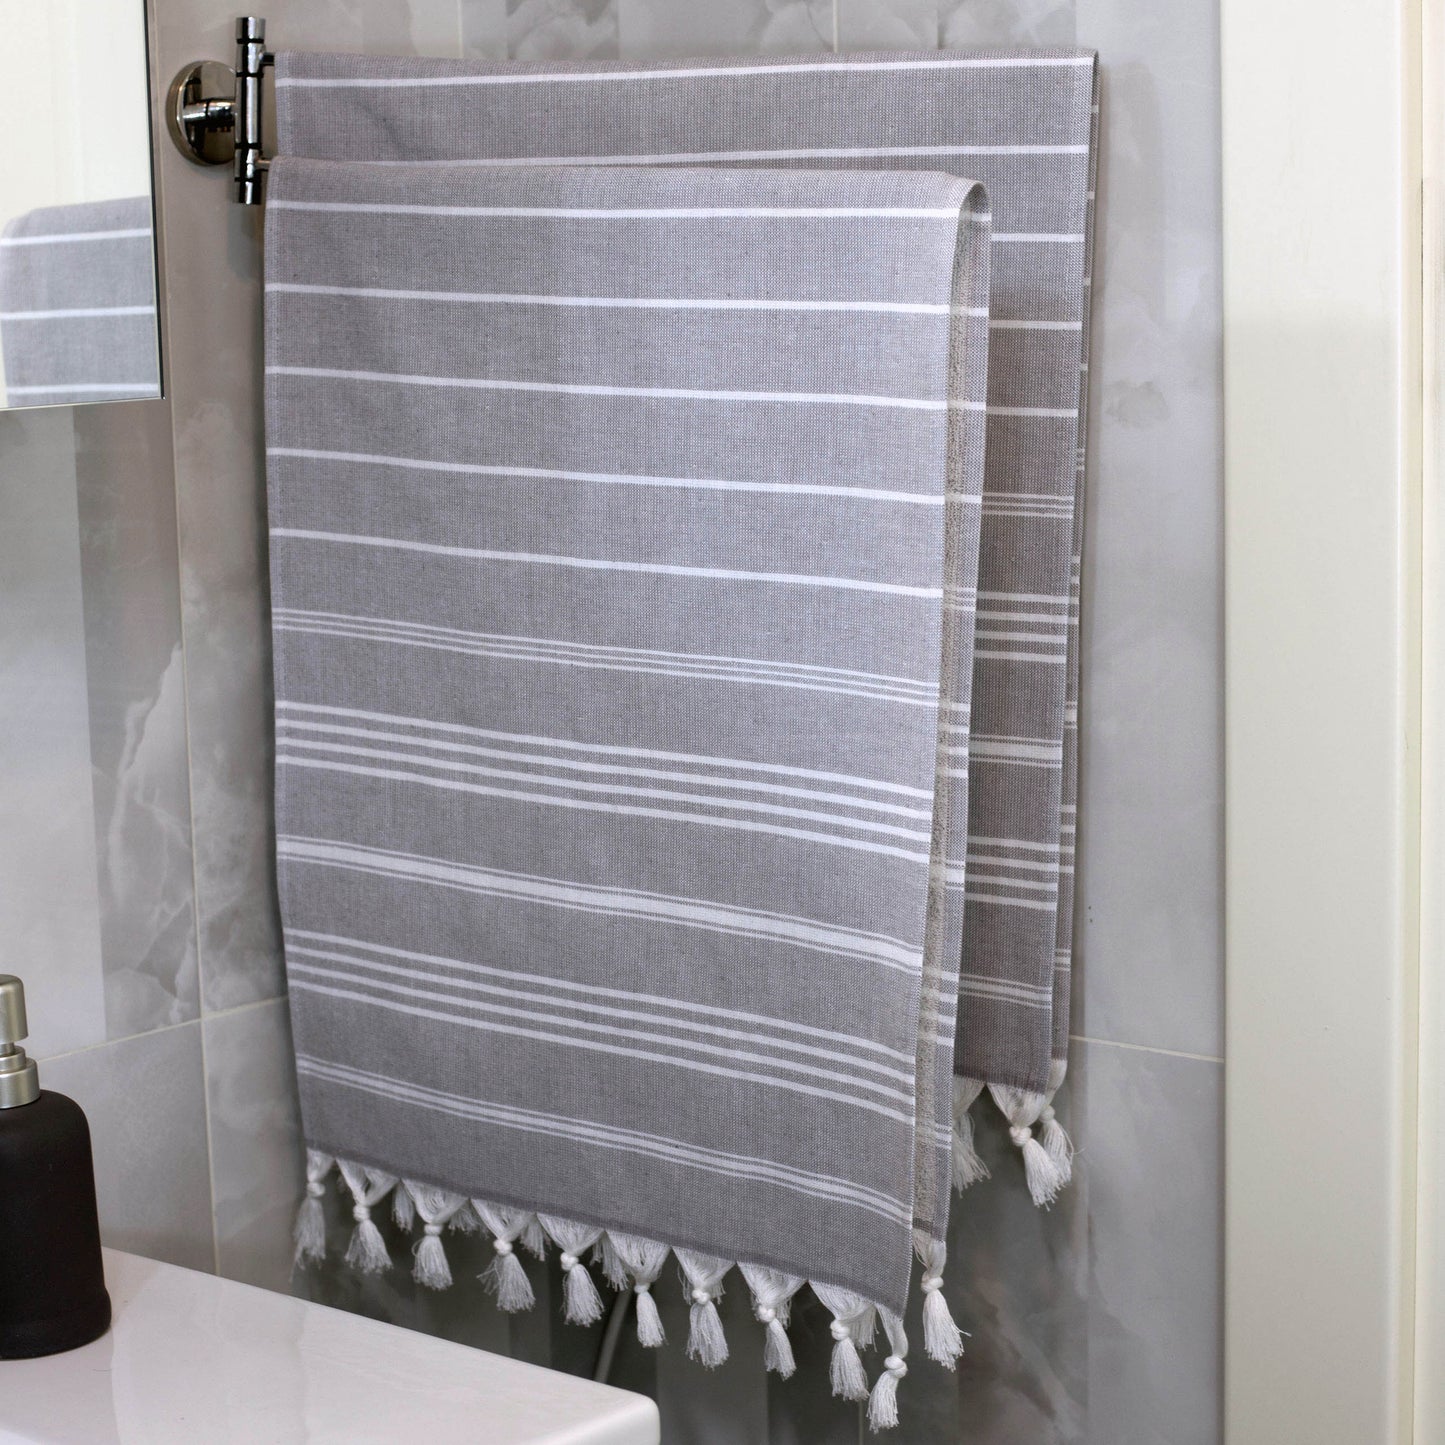 Turkish Home Hand Towel Set of 4, Silver Gray, 100% Cotton 18 X 40 inches (Terry)